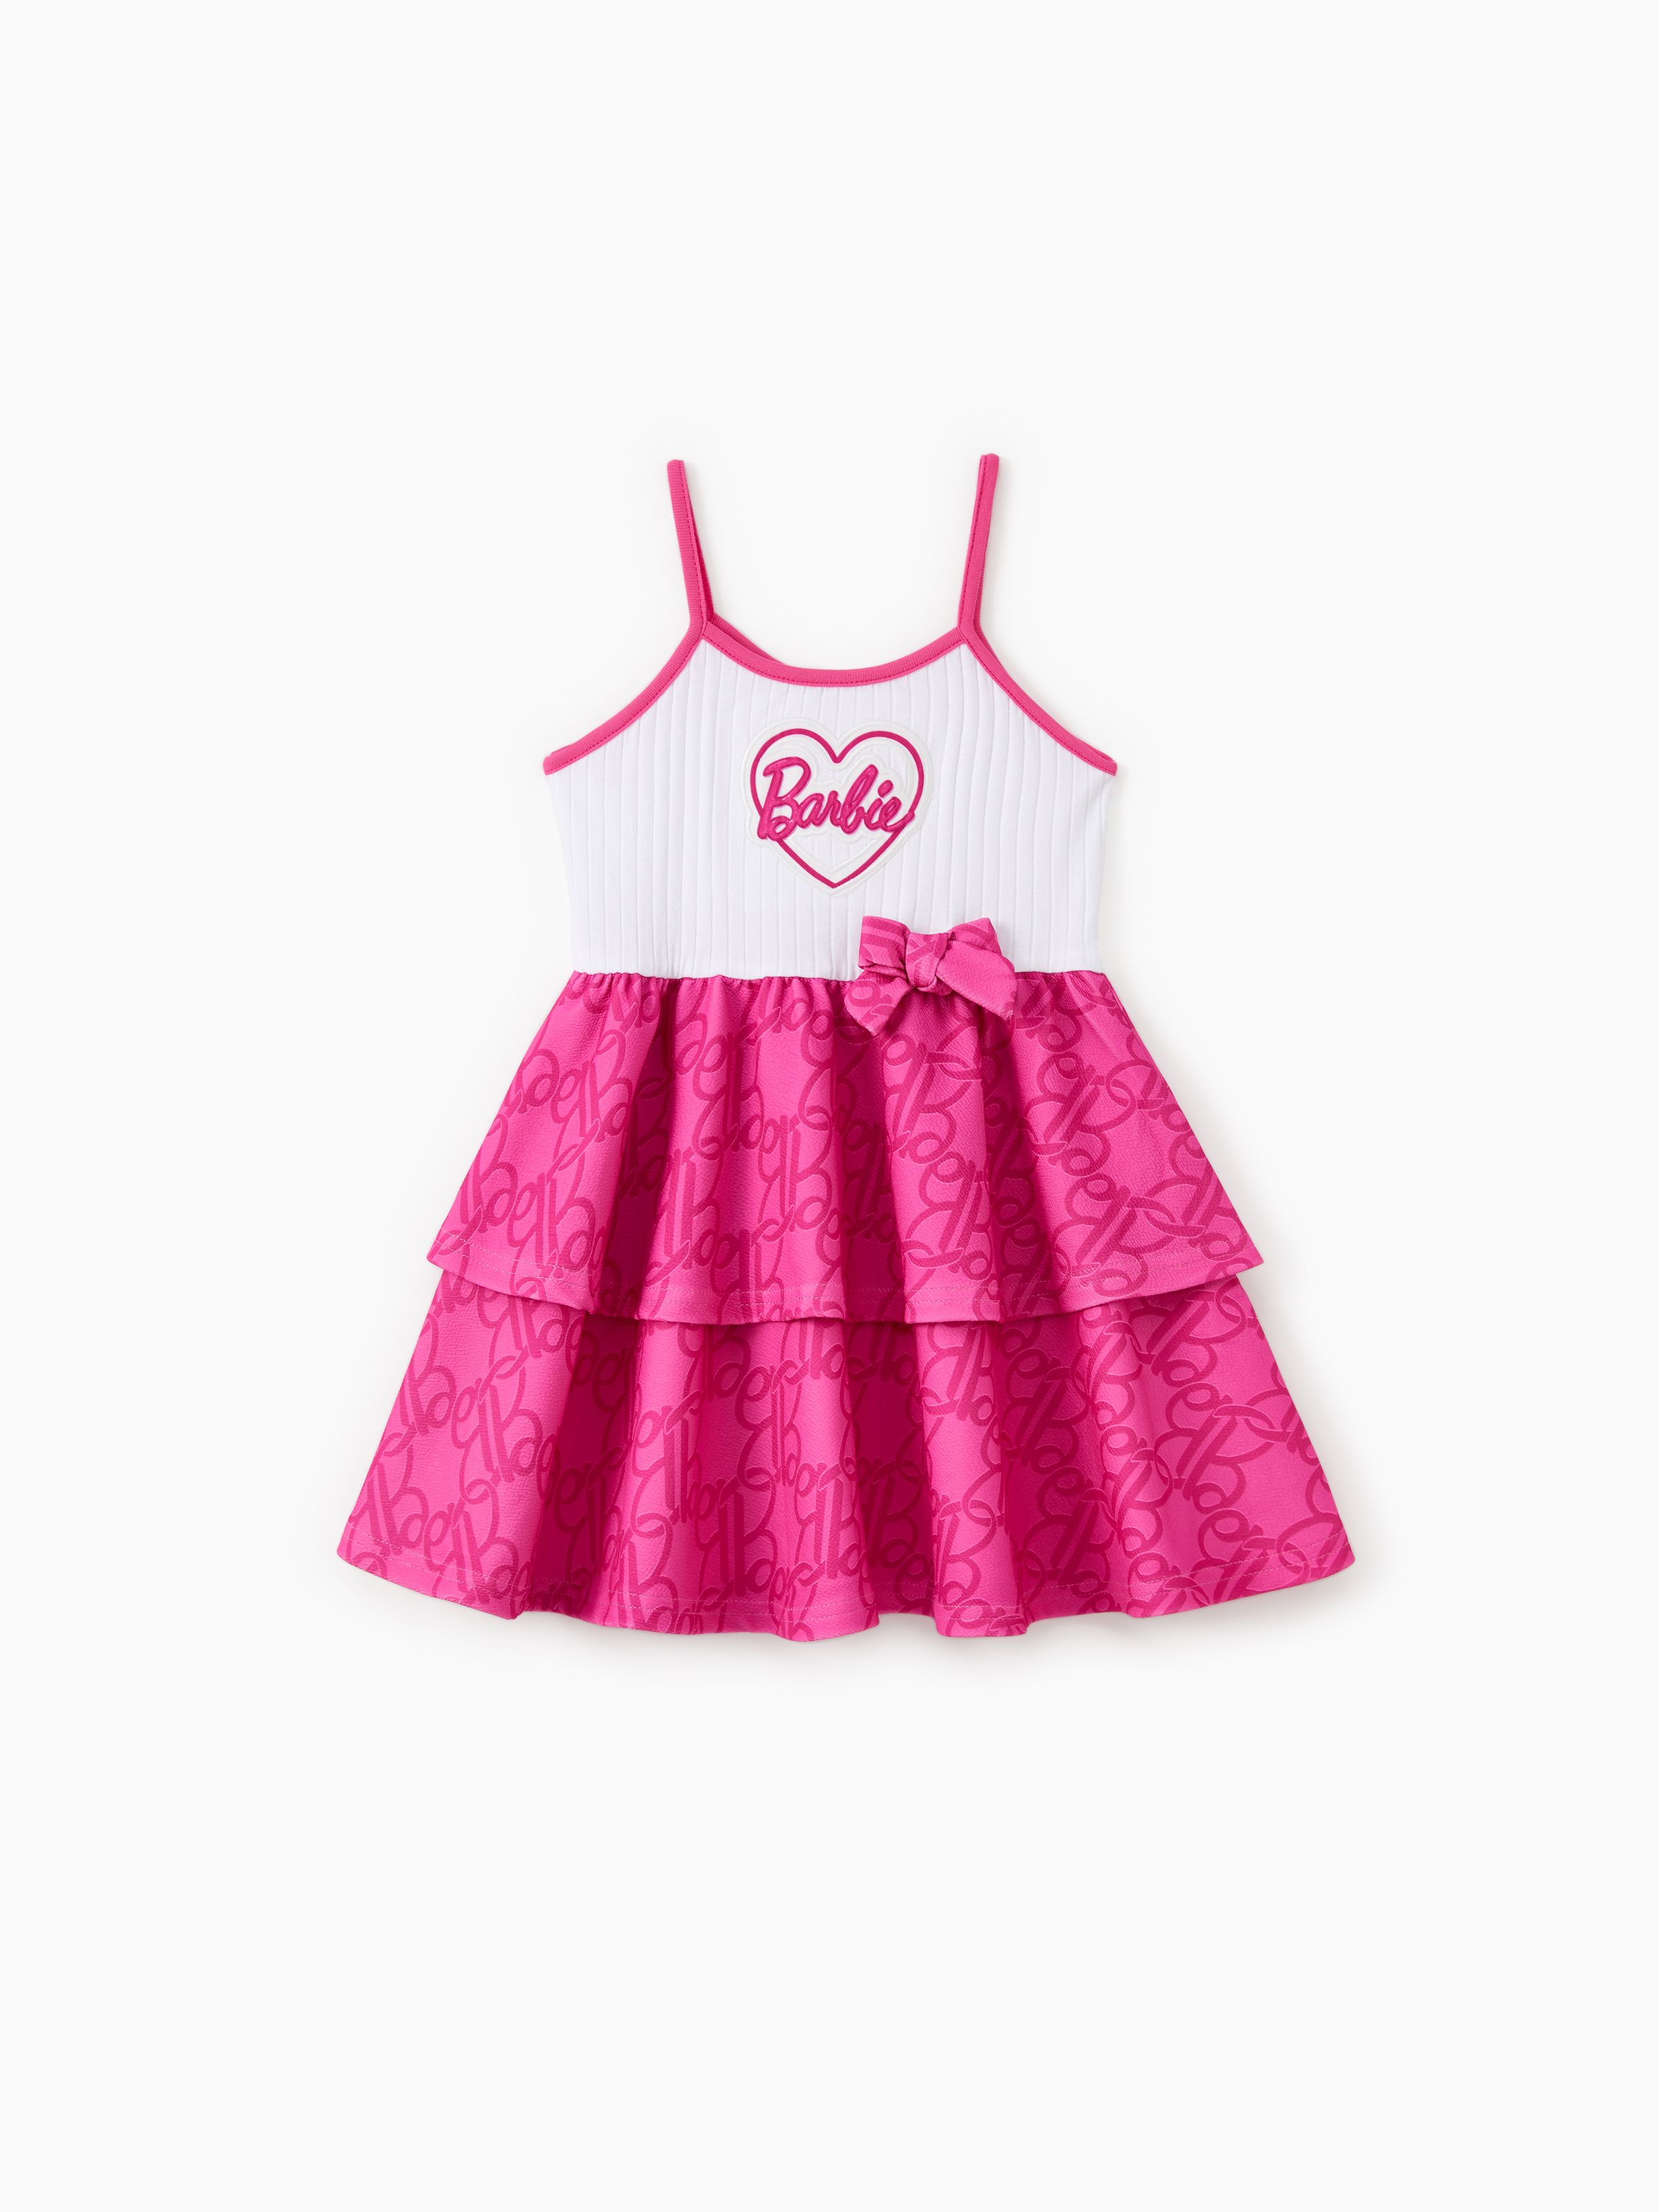 

Barbie Mommy and Me Classic Letter Print Cotton Ruffle Bowknot Dress